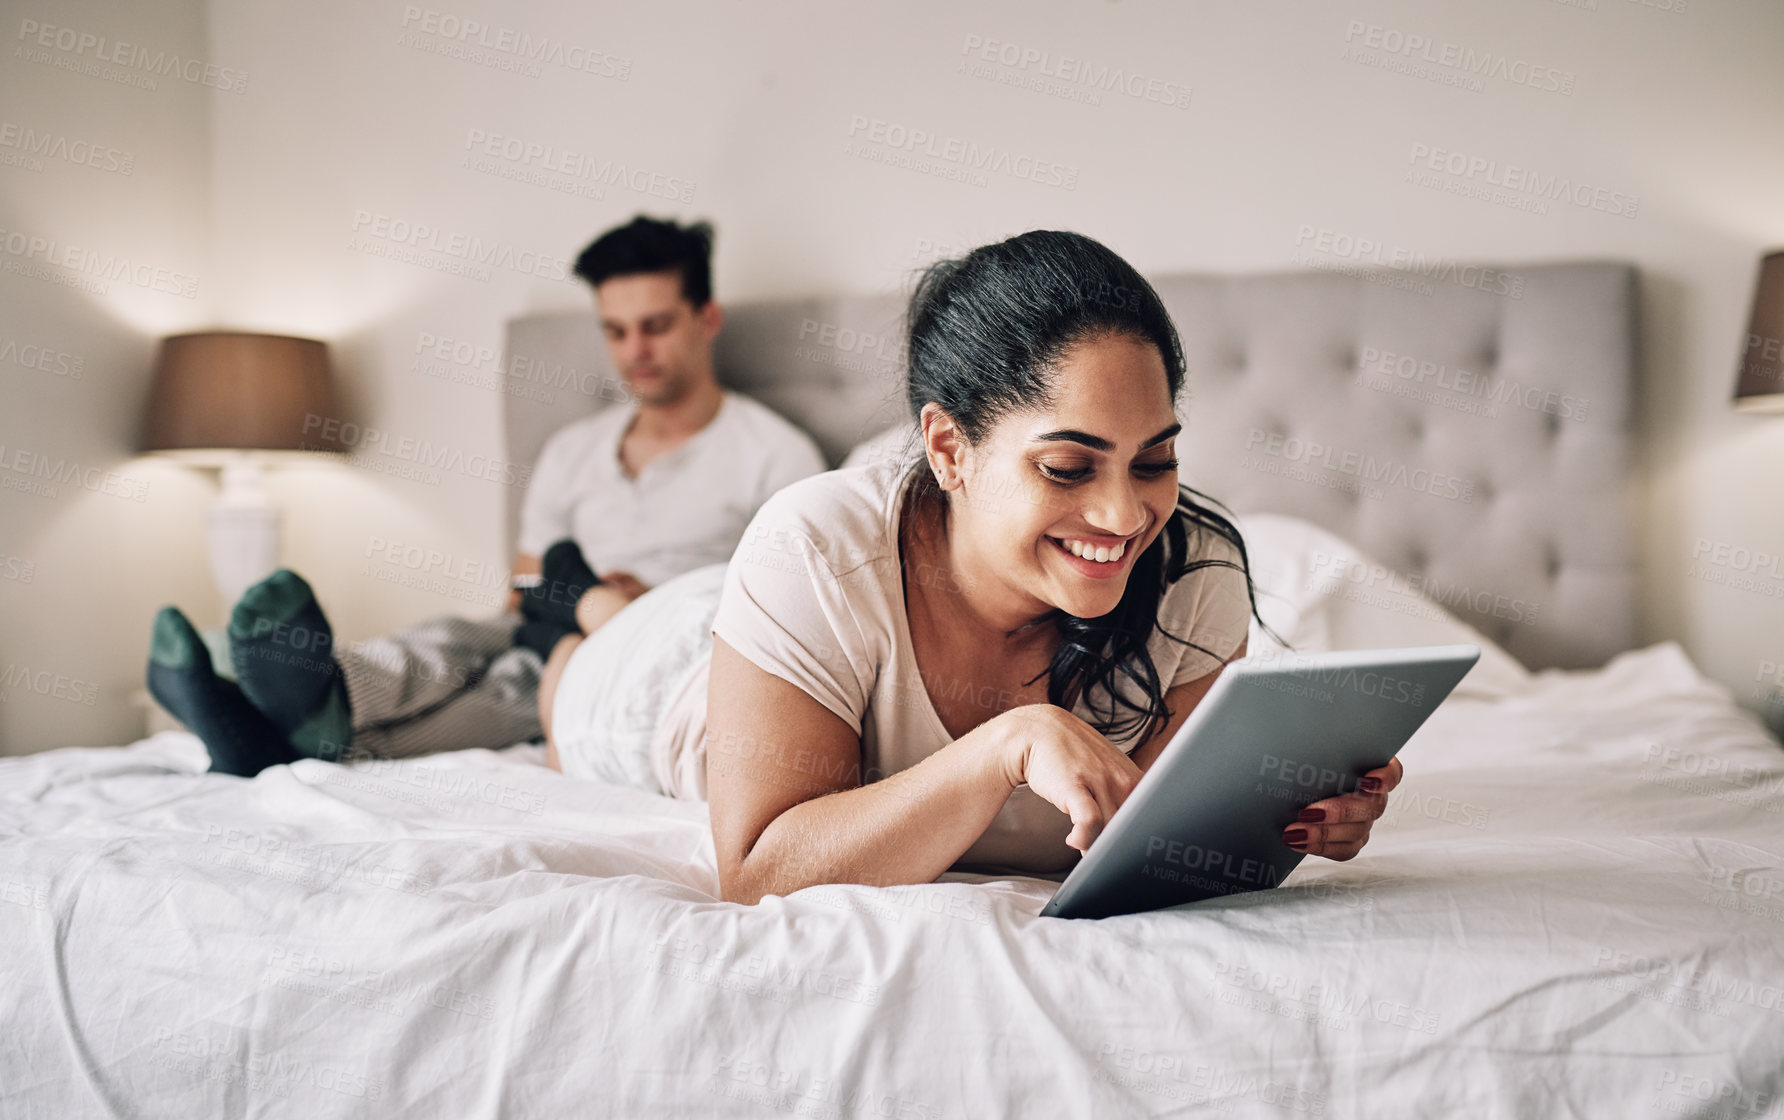 Buy stock photo Shot of a young woman using a digital tablet while her boyfriend sits in the background